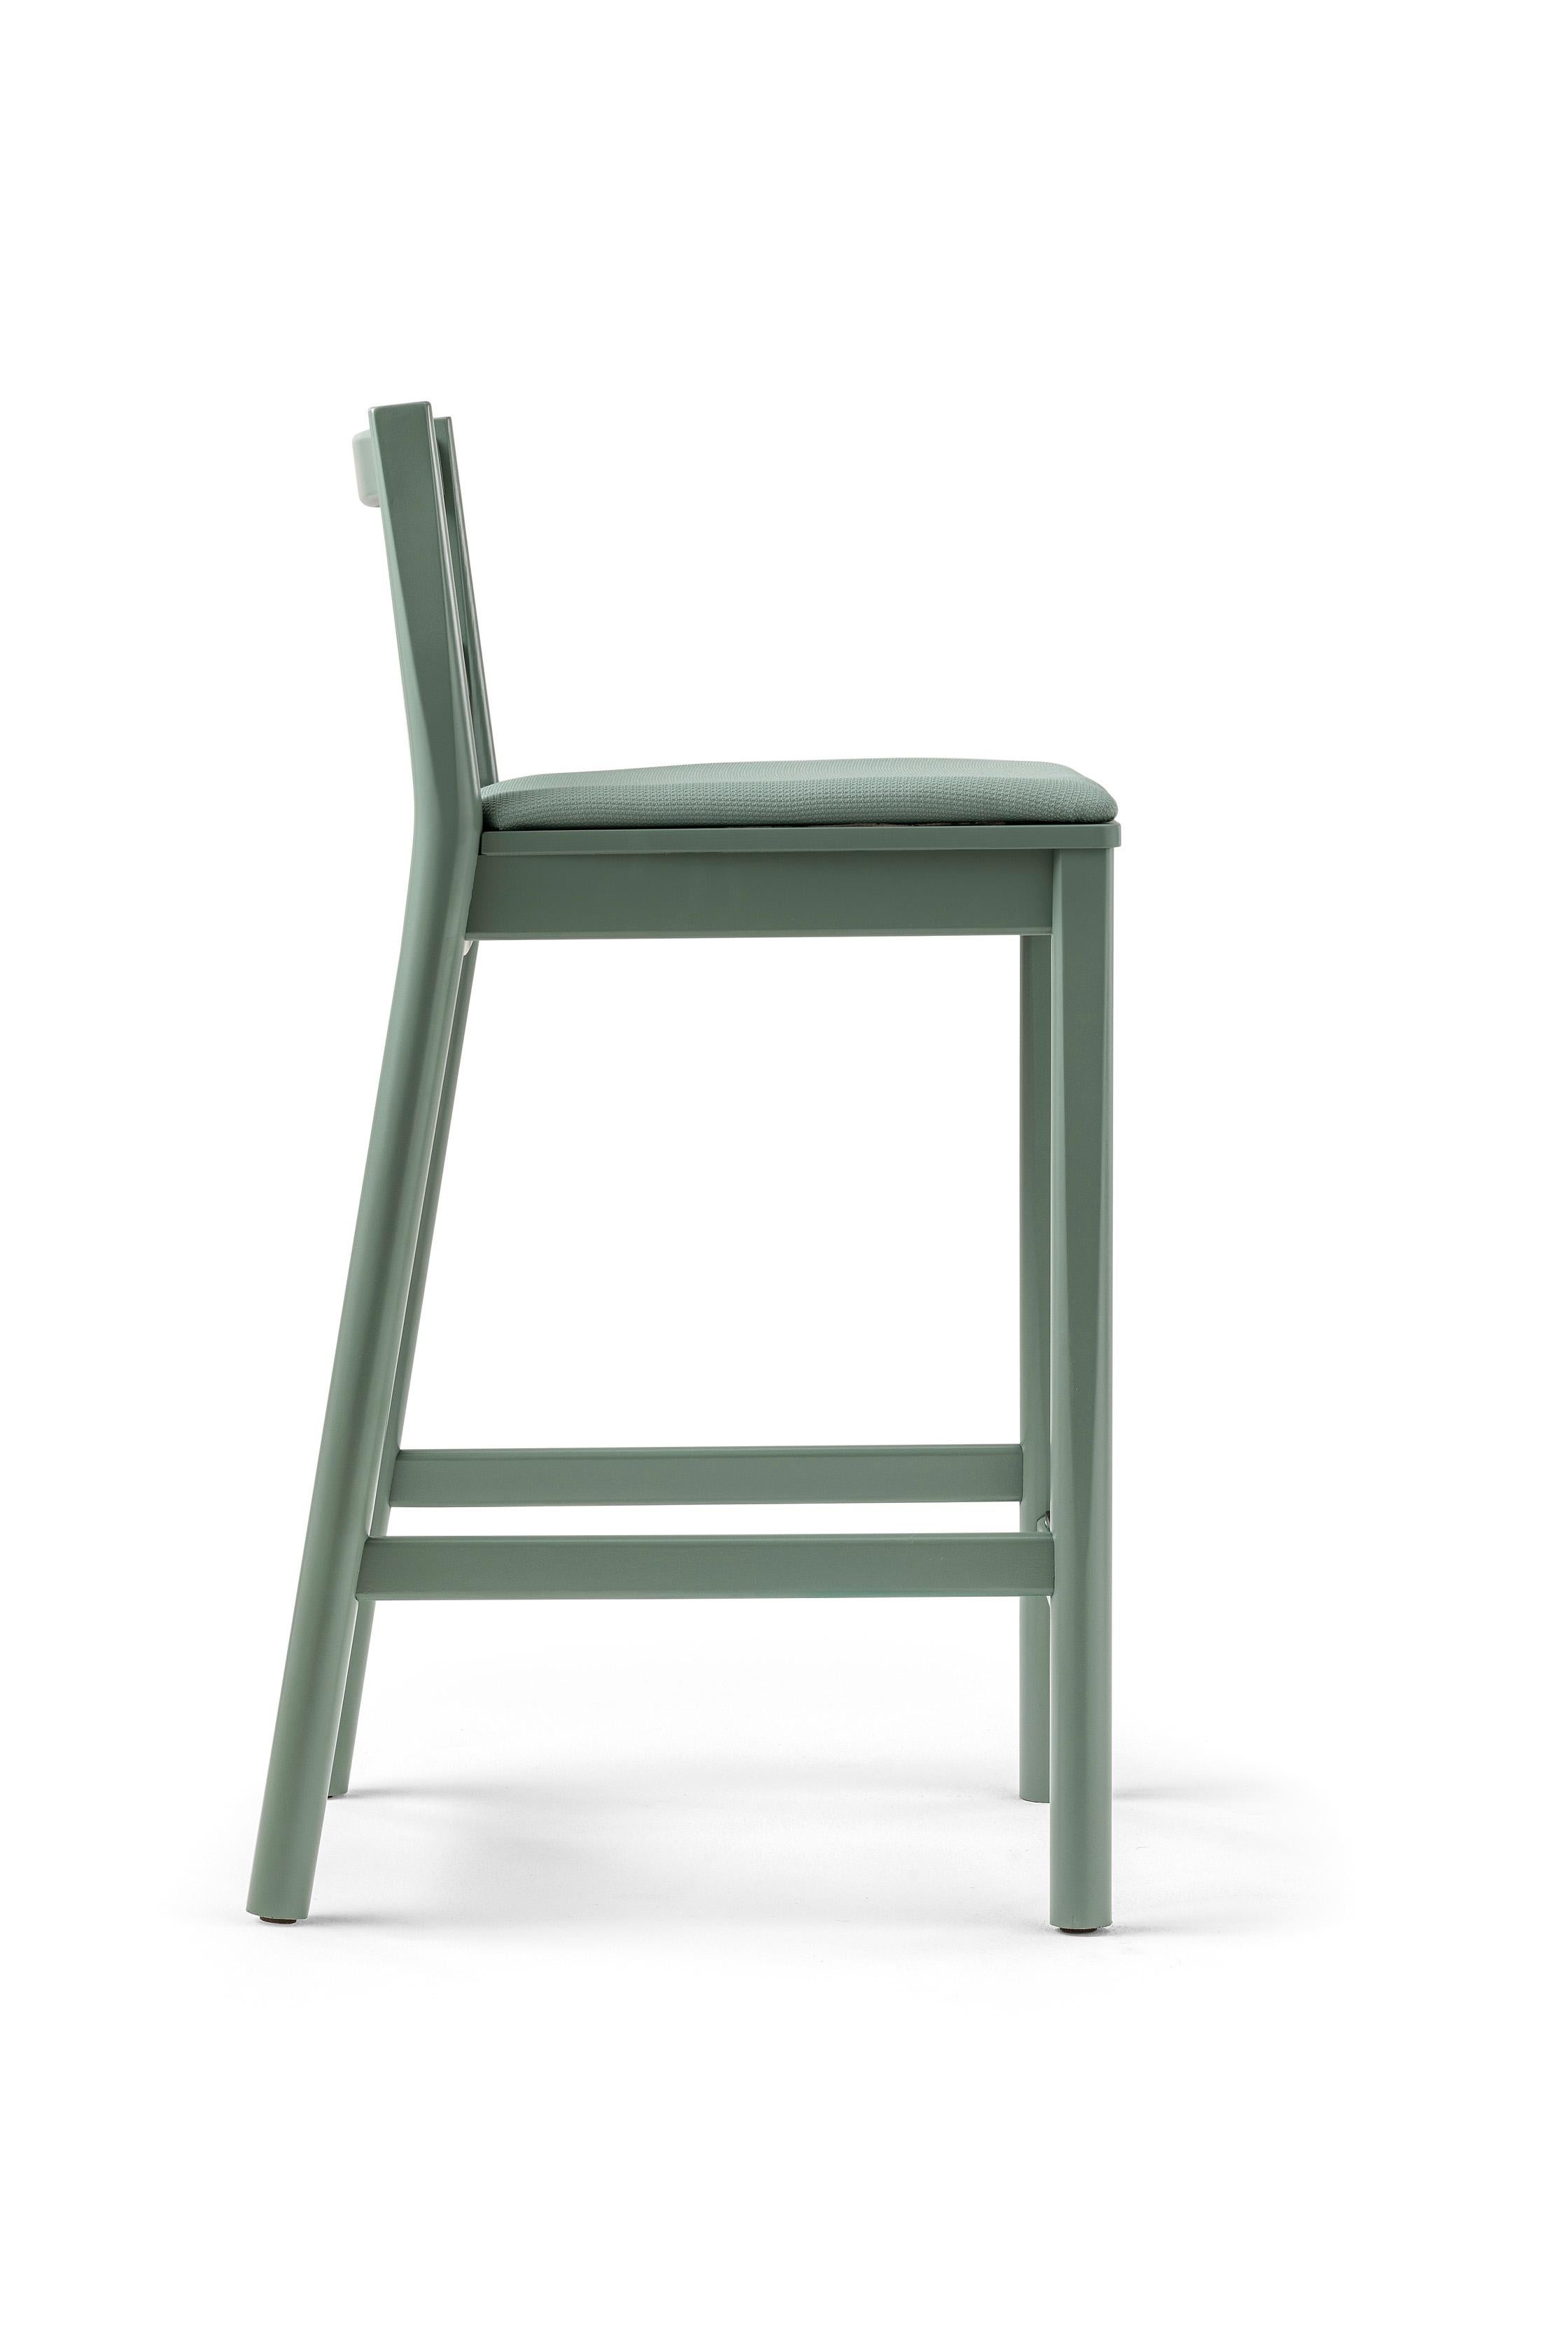 Modern Stool Art, Julie 0026-LE Beechwood Painted and Wood Seat by Emilio Nanni For Sale